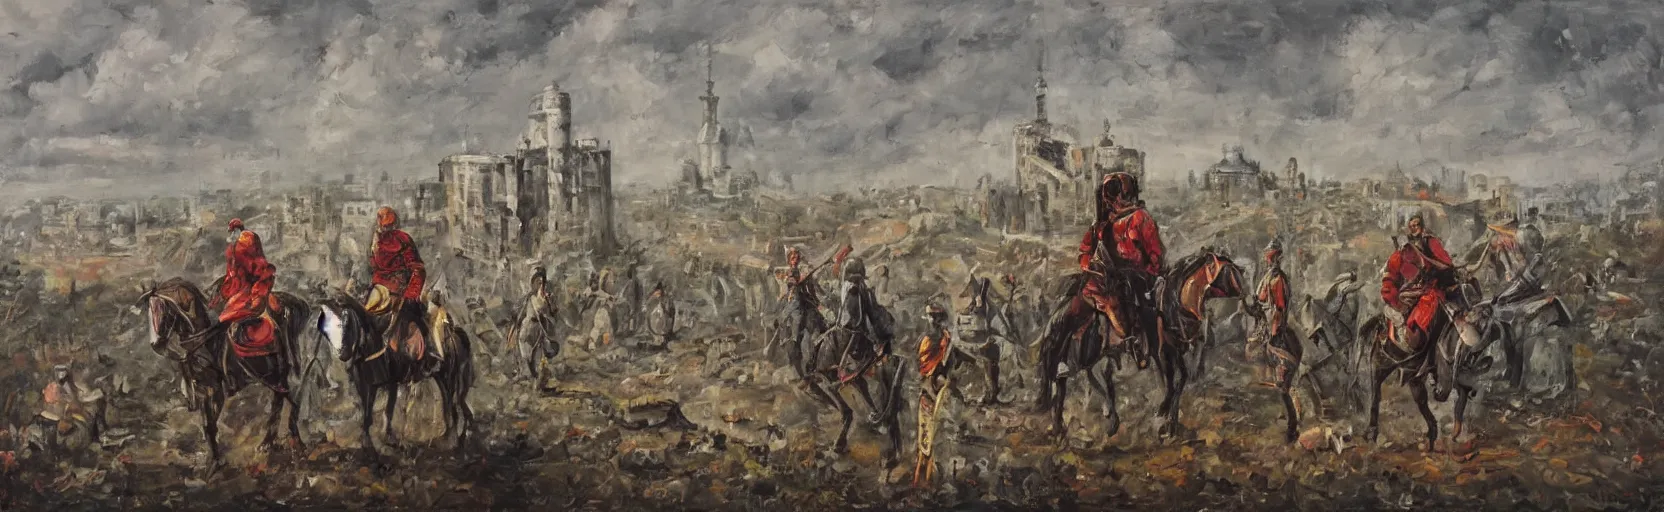 Prompt: horseback knights at scenic overlook; cloudy, grey skies, walled fort city deteriorating office buildings in background on hill; la Bastille, post apocalyptic, grungy; oil on canvas, colorful